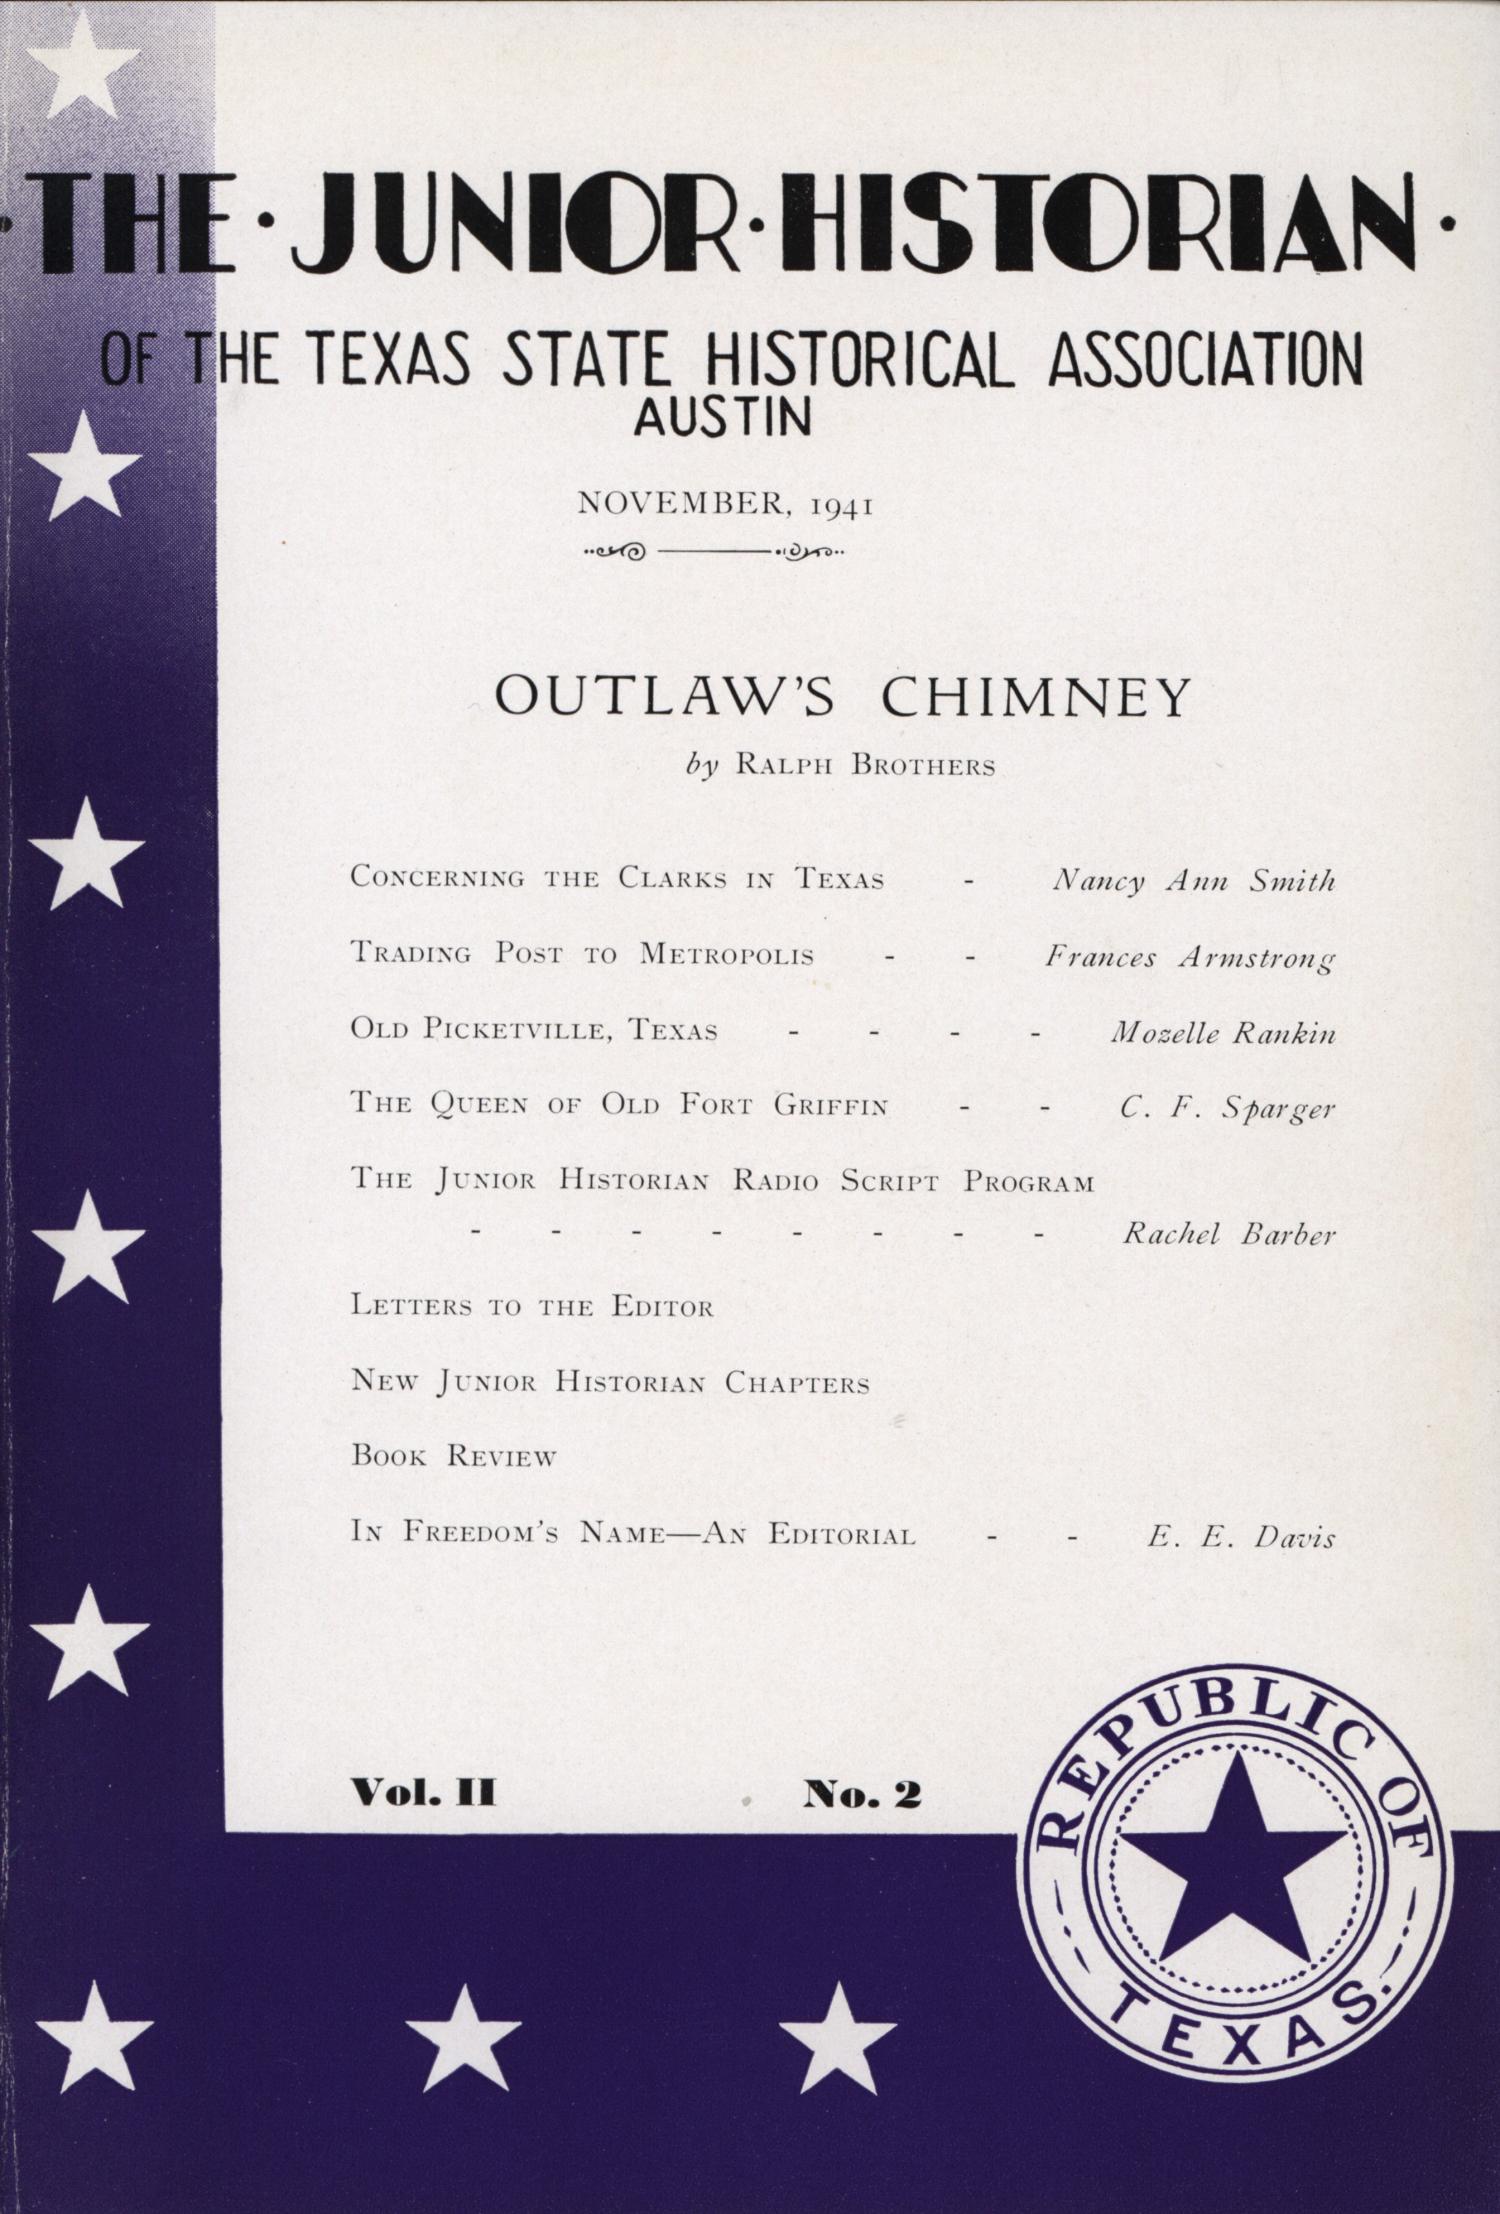 The Junior Historian, Volume 2, Number 2, November 1941
                                                
                                                    Front Cover
                                                